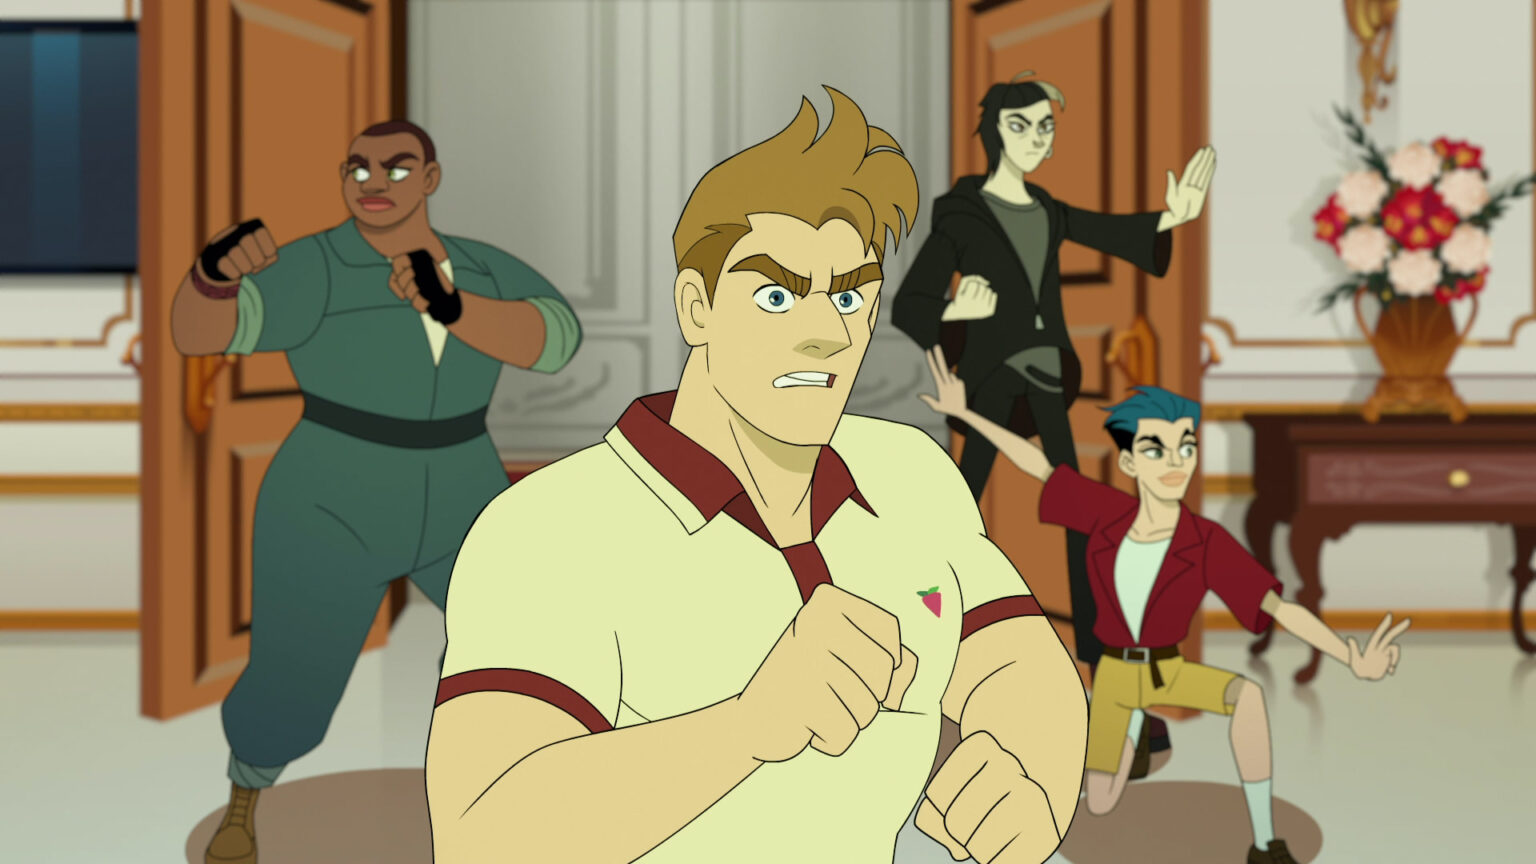 Netflix has a brand new animation series coming out at the end of this summer. Get ready for superspy action with the cast and crew of 'Q-Force'.